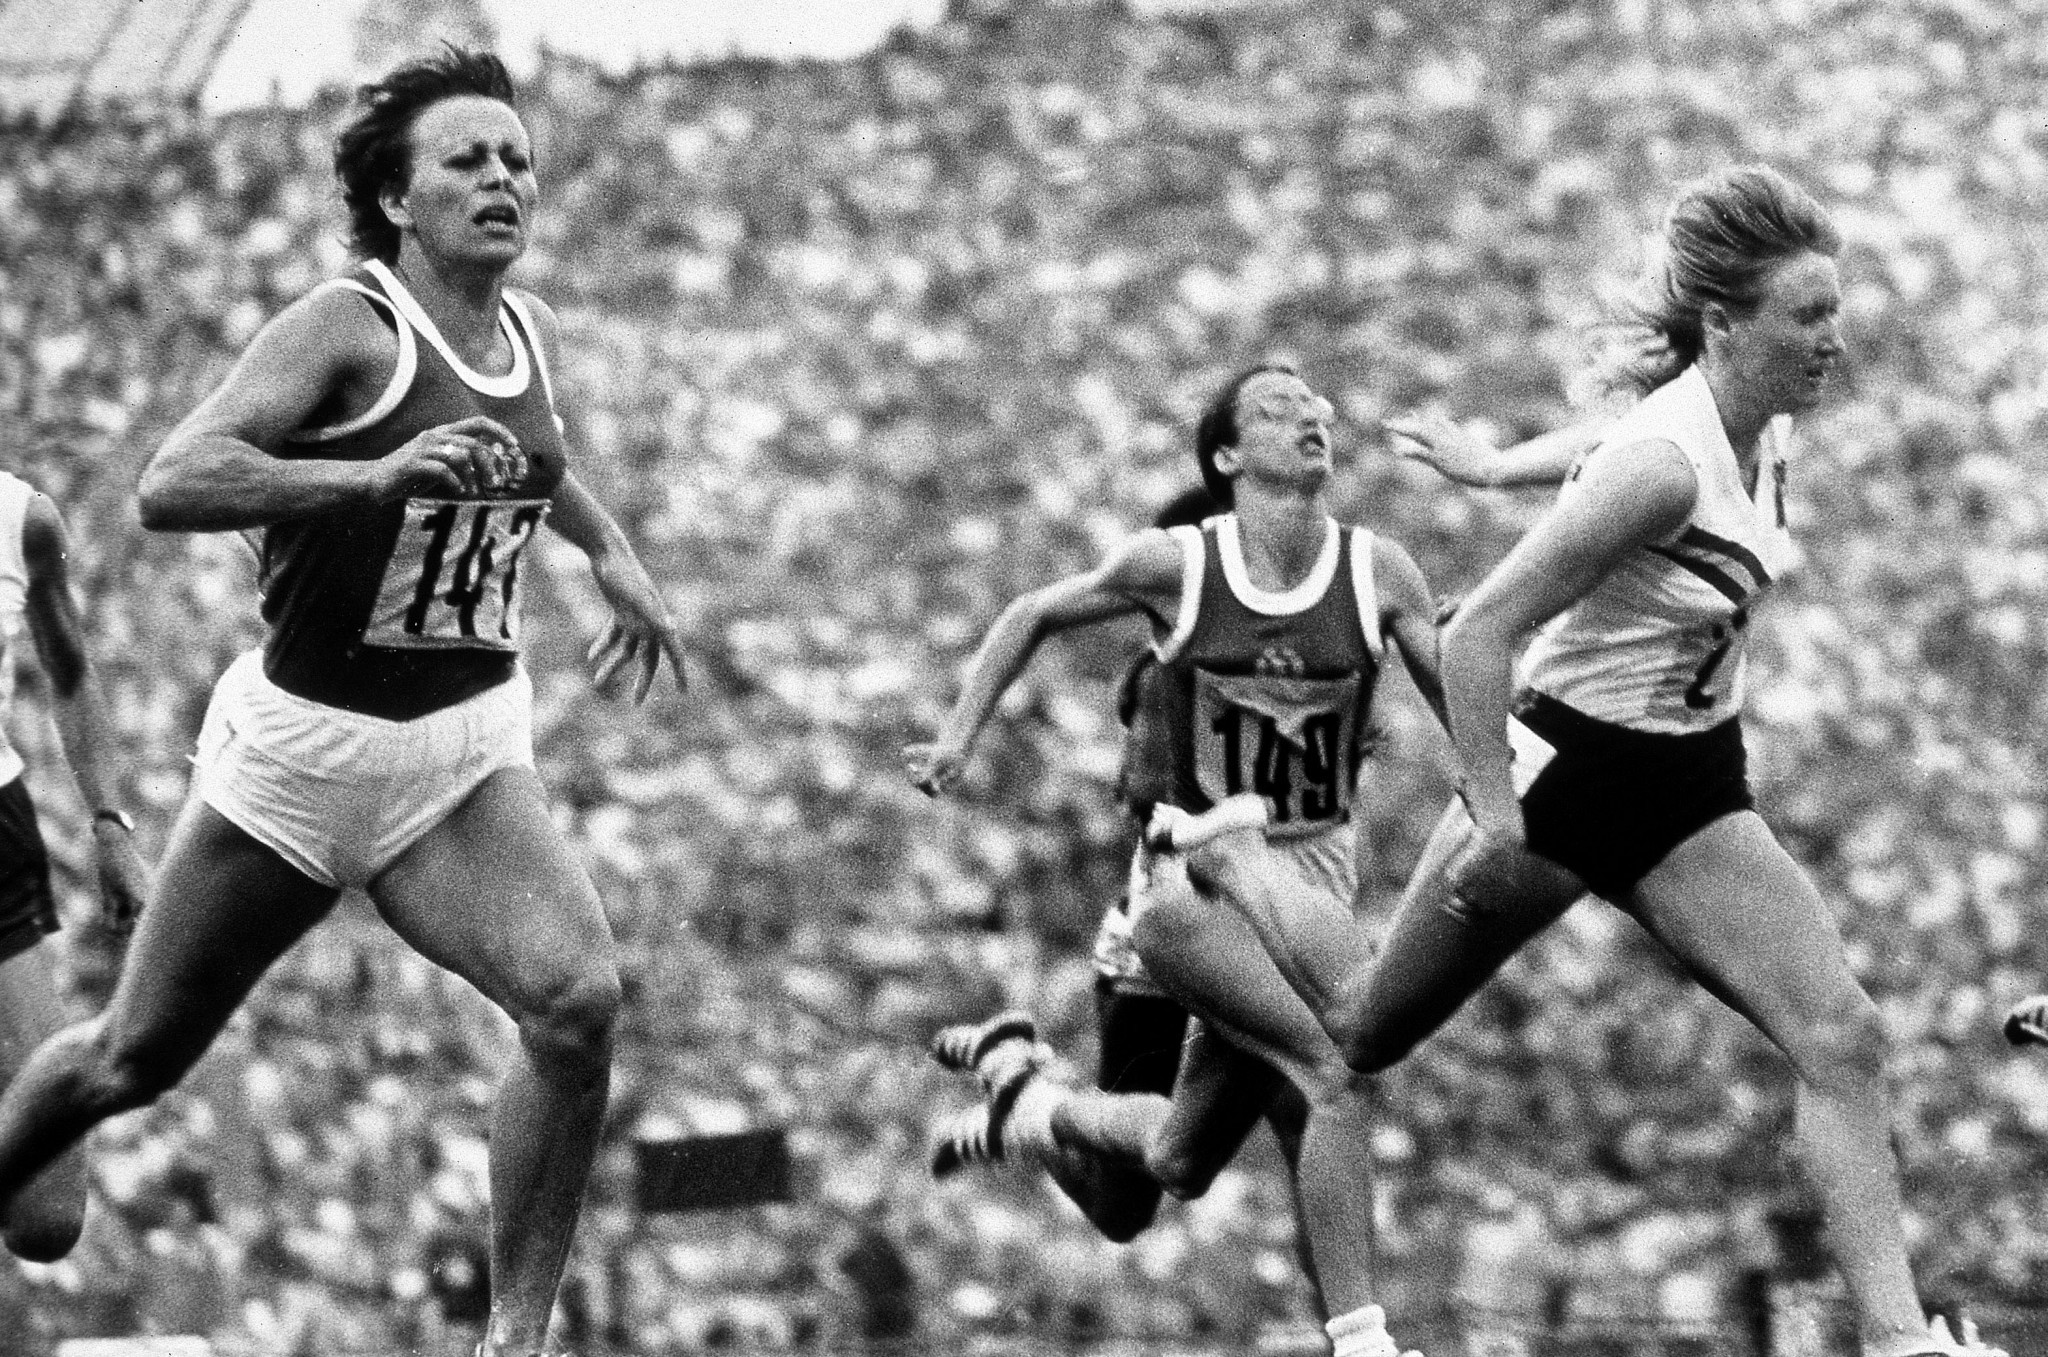 Raelene Boyle, centre, won three Olympic silver medals, including in the 100m and 200m at Munich 1972 where she was beaten in both races by Renate Stecher, left, from East Germany ©Getty Images